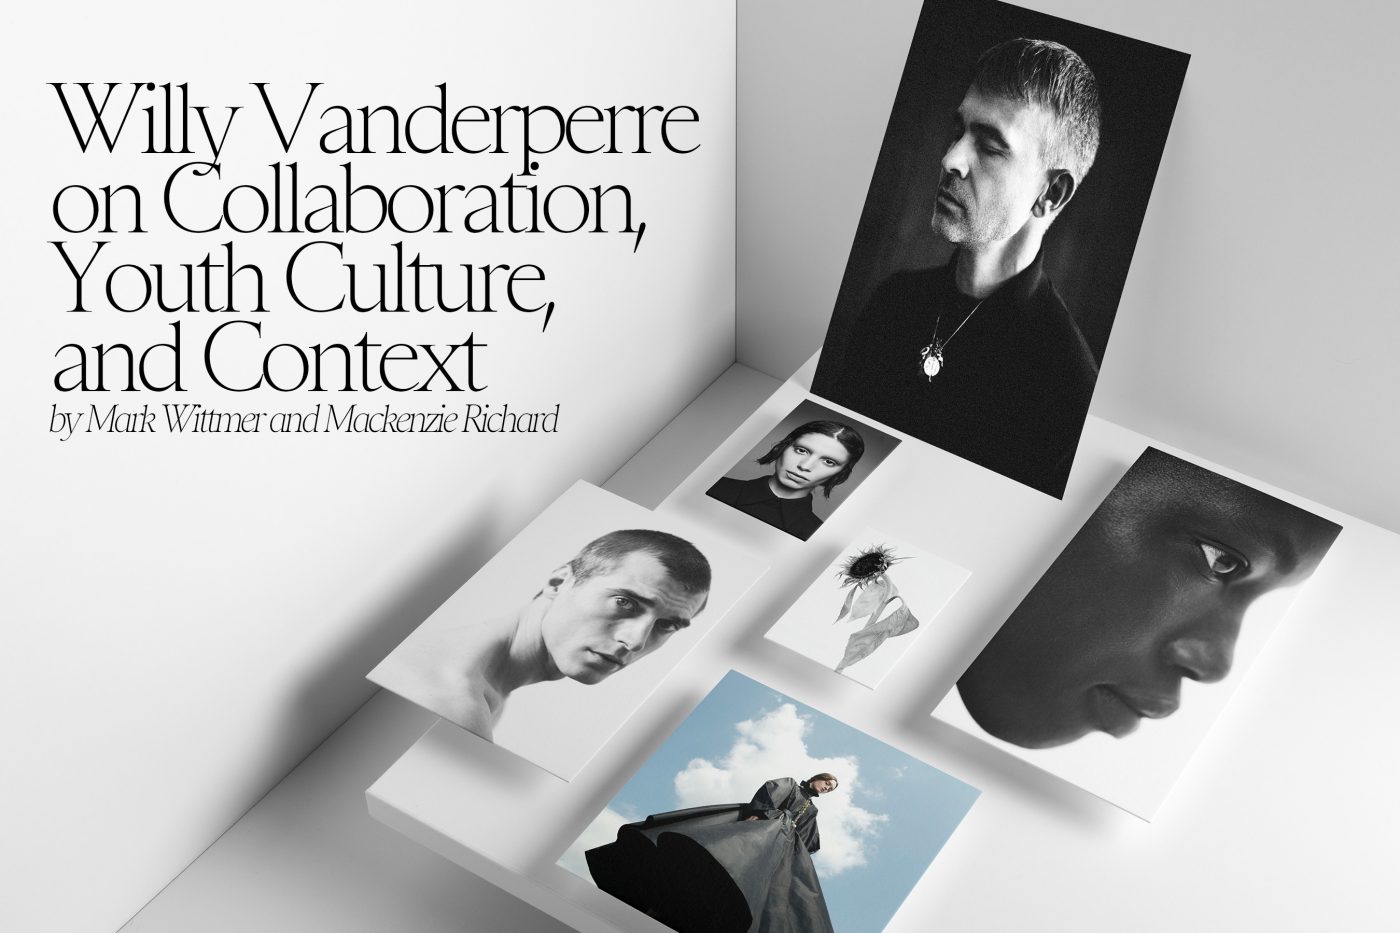 Willy Vanderperre on Collaboration, Youth Culture and Context Insight article for the Impression header image with photos by Willy Vanderperre